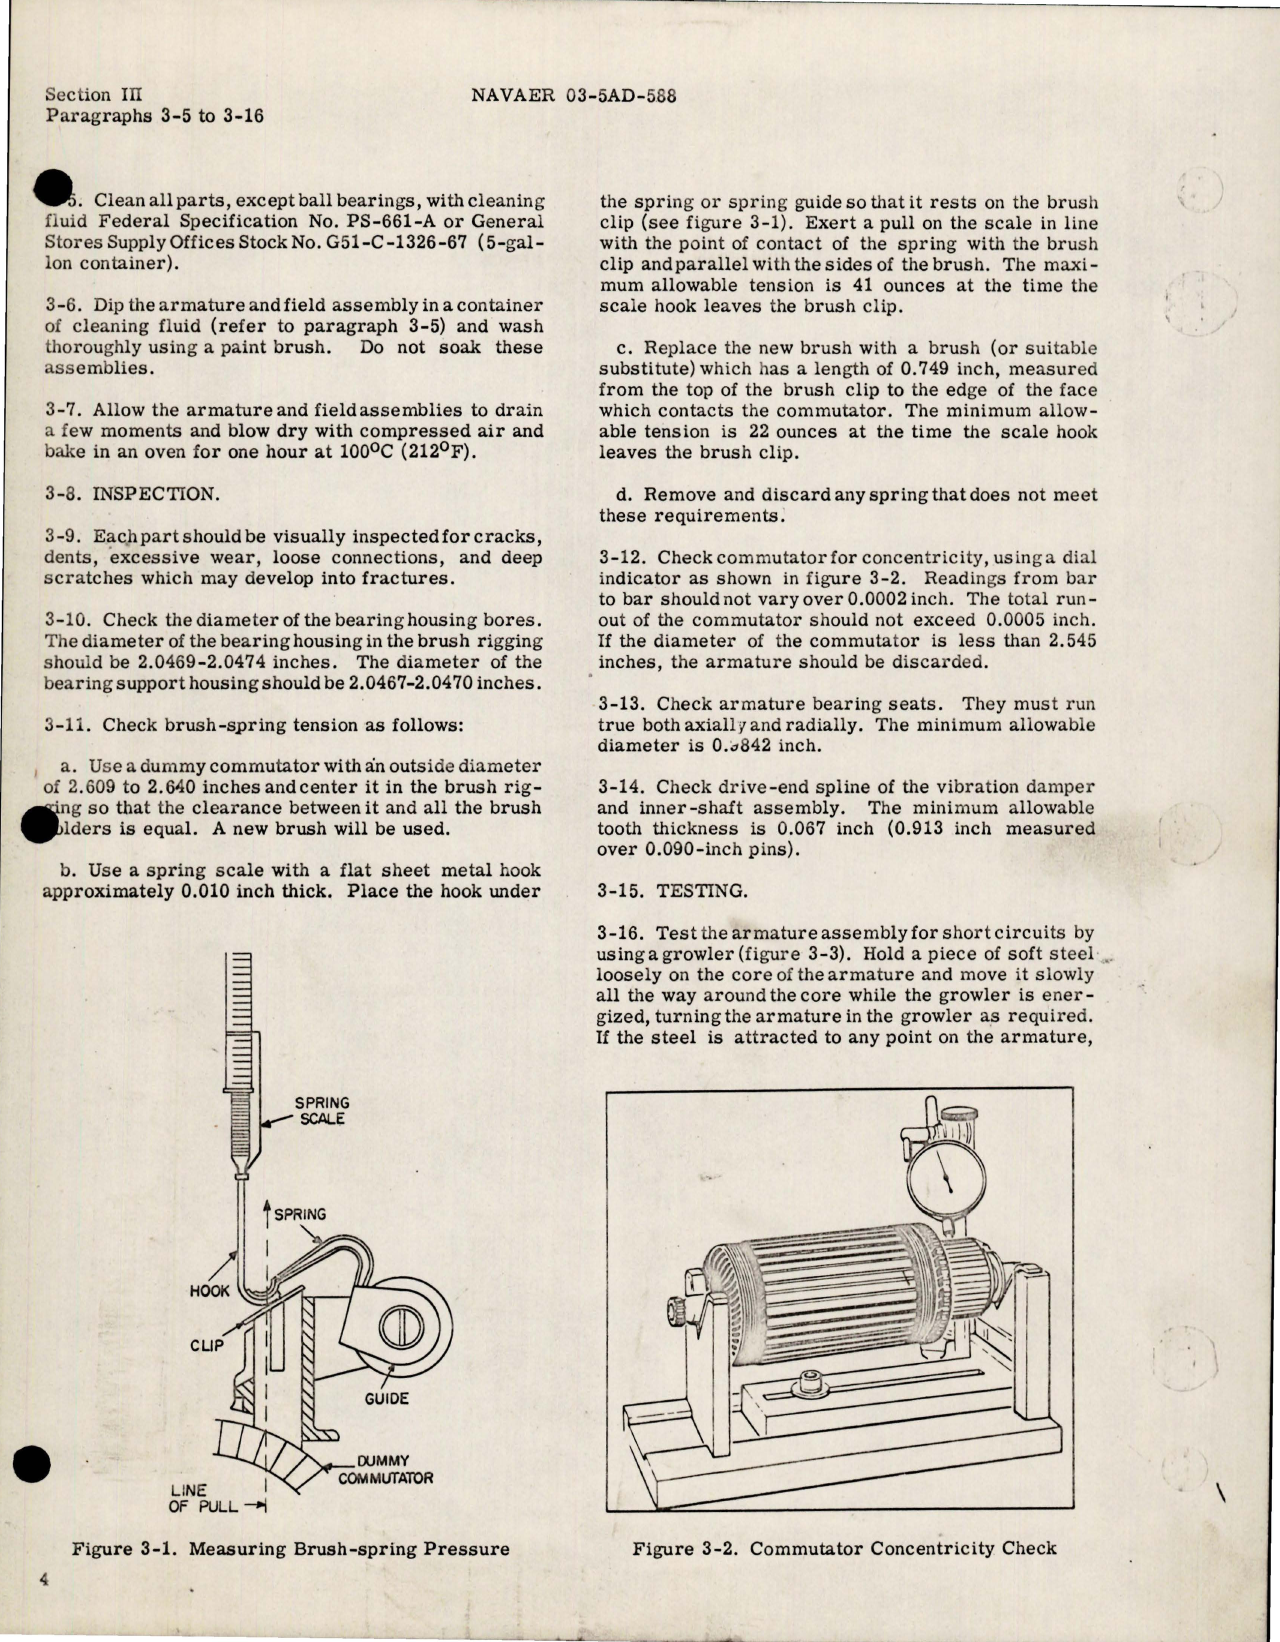 Sample page 9 from AirCorps Library document: Service and Overhaul Instructions for DC Generator - Models: 2CM76C4, 2CM76C4A, 2CM76E4, 2CM76E4C, and 2CM76E5